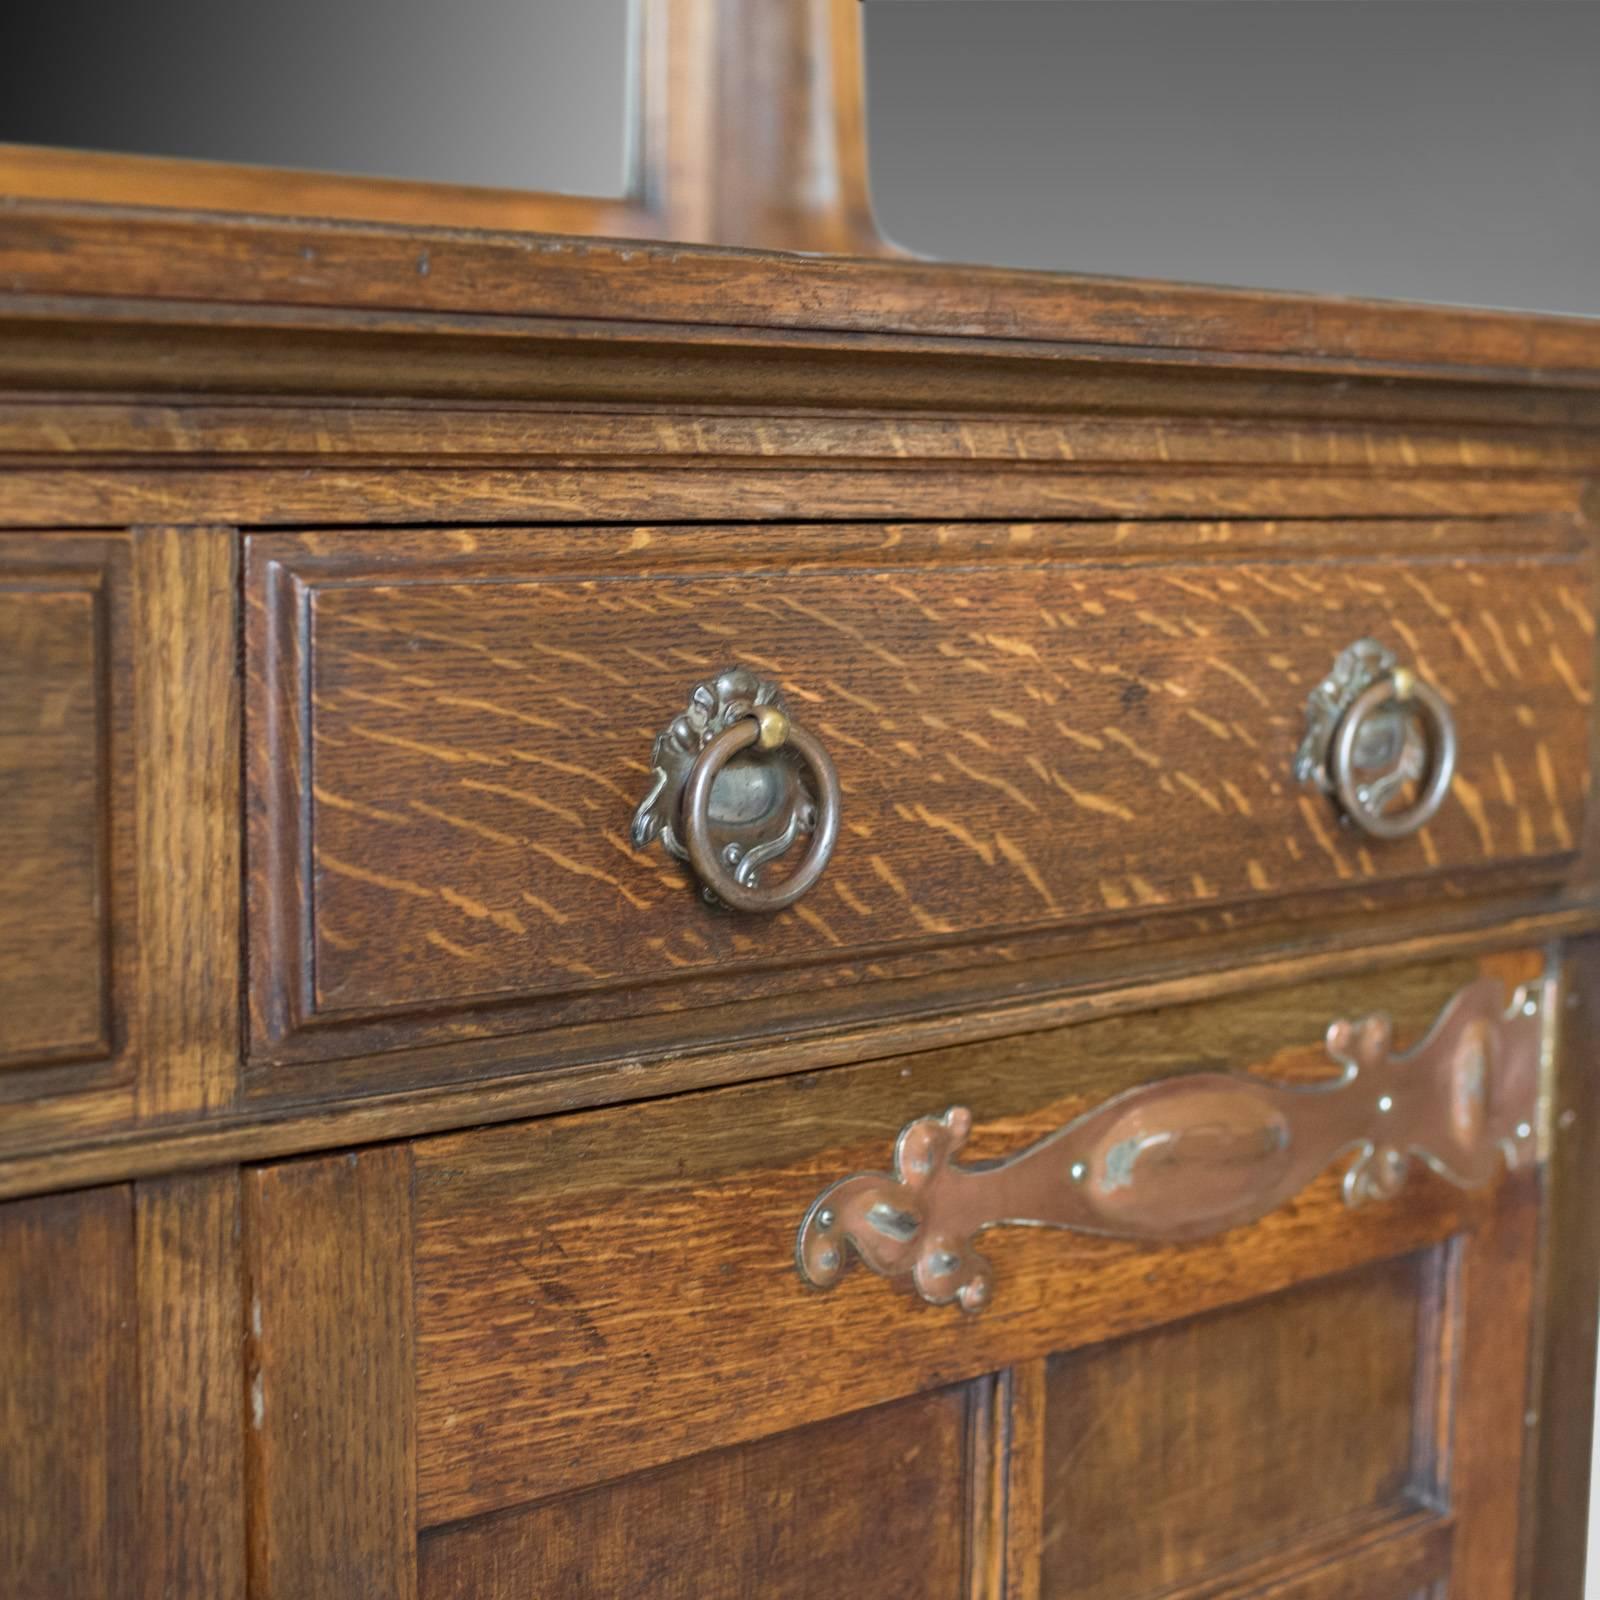 20th Century Antique Sideboard, English Oak, Arts & Crafts Cabinet, Liberty Taste, circa 1900 For Sale